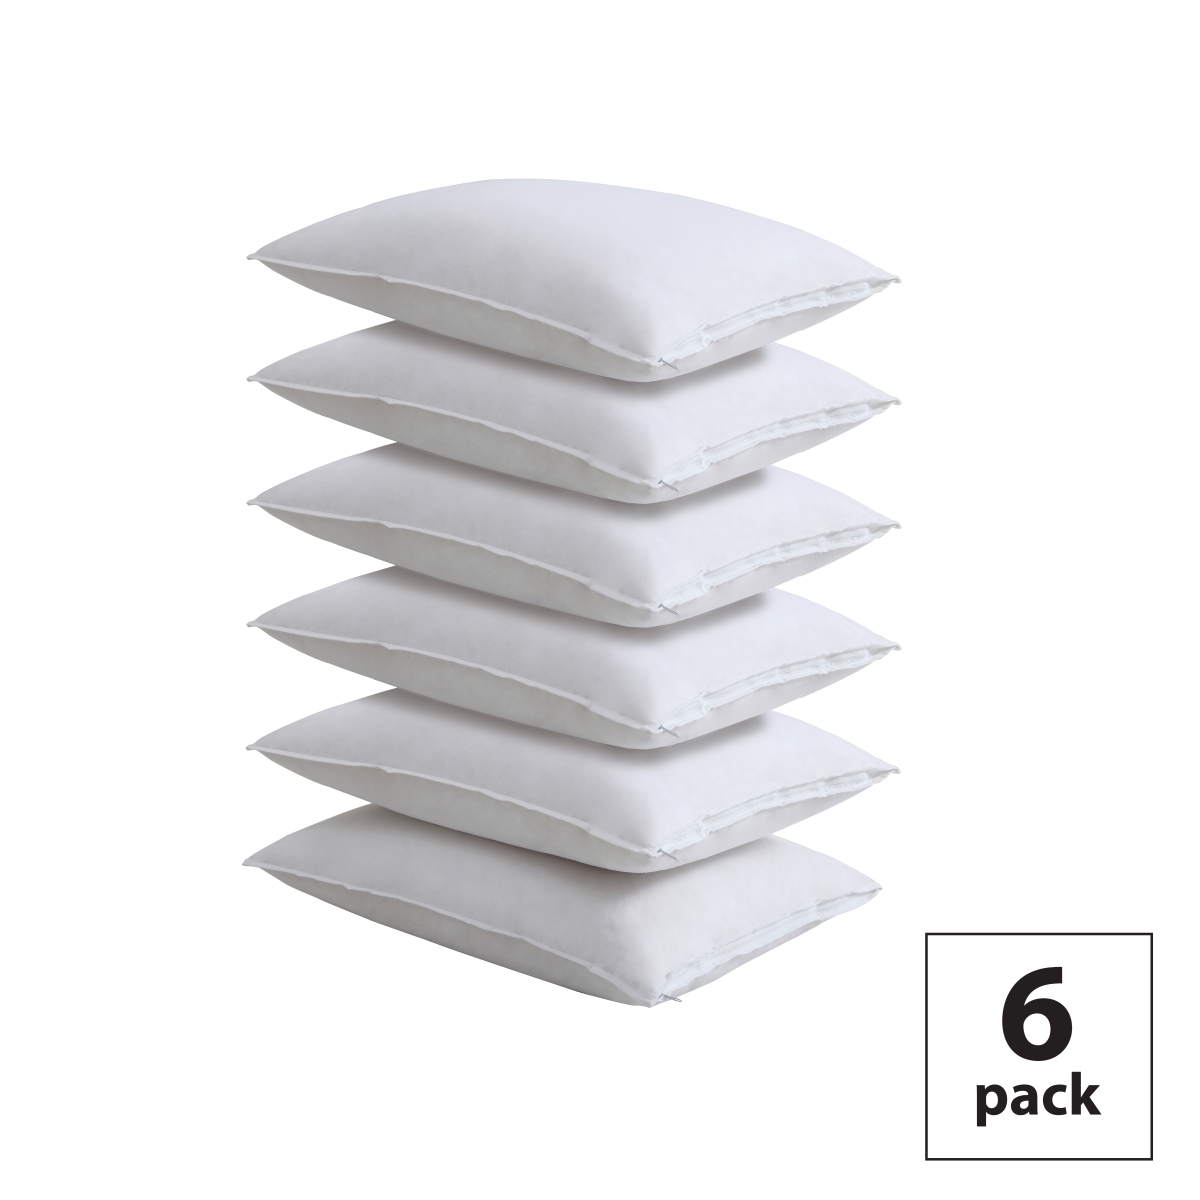 Fre10006whit07 100 Percent Cotton Pillow Protectors, Standard Size - Pack Of 6